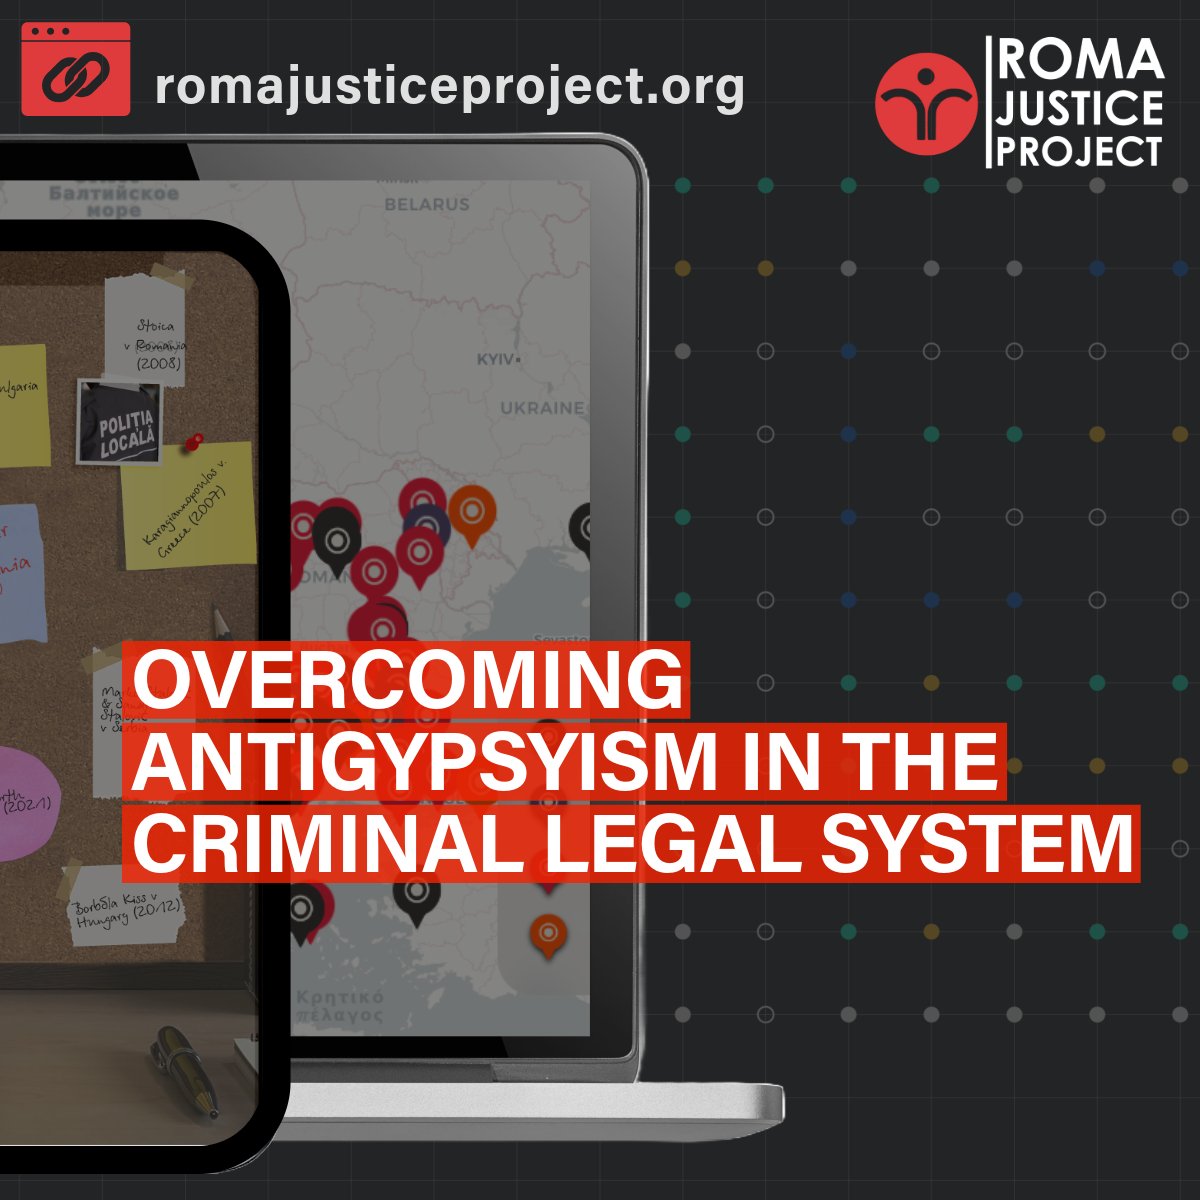 📢Today, on #RomaResistanceDay, we launch the #RomaJusticeProject! Our new platform advocates for a fairer legal system for Roma across Europe, exposing systemic racism through lived experiences and evidence. Explore now 👉 shorturl.at/dwJW7